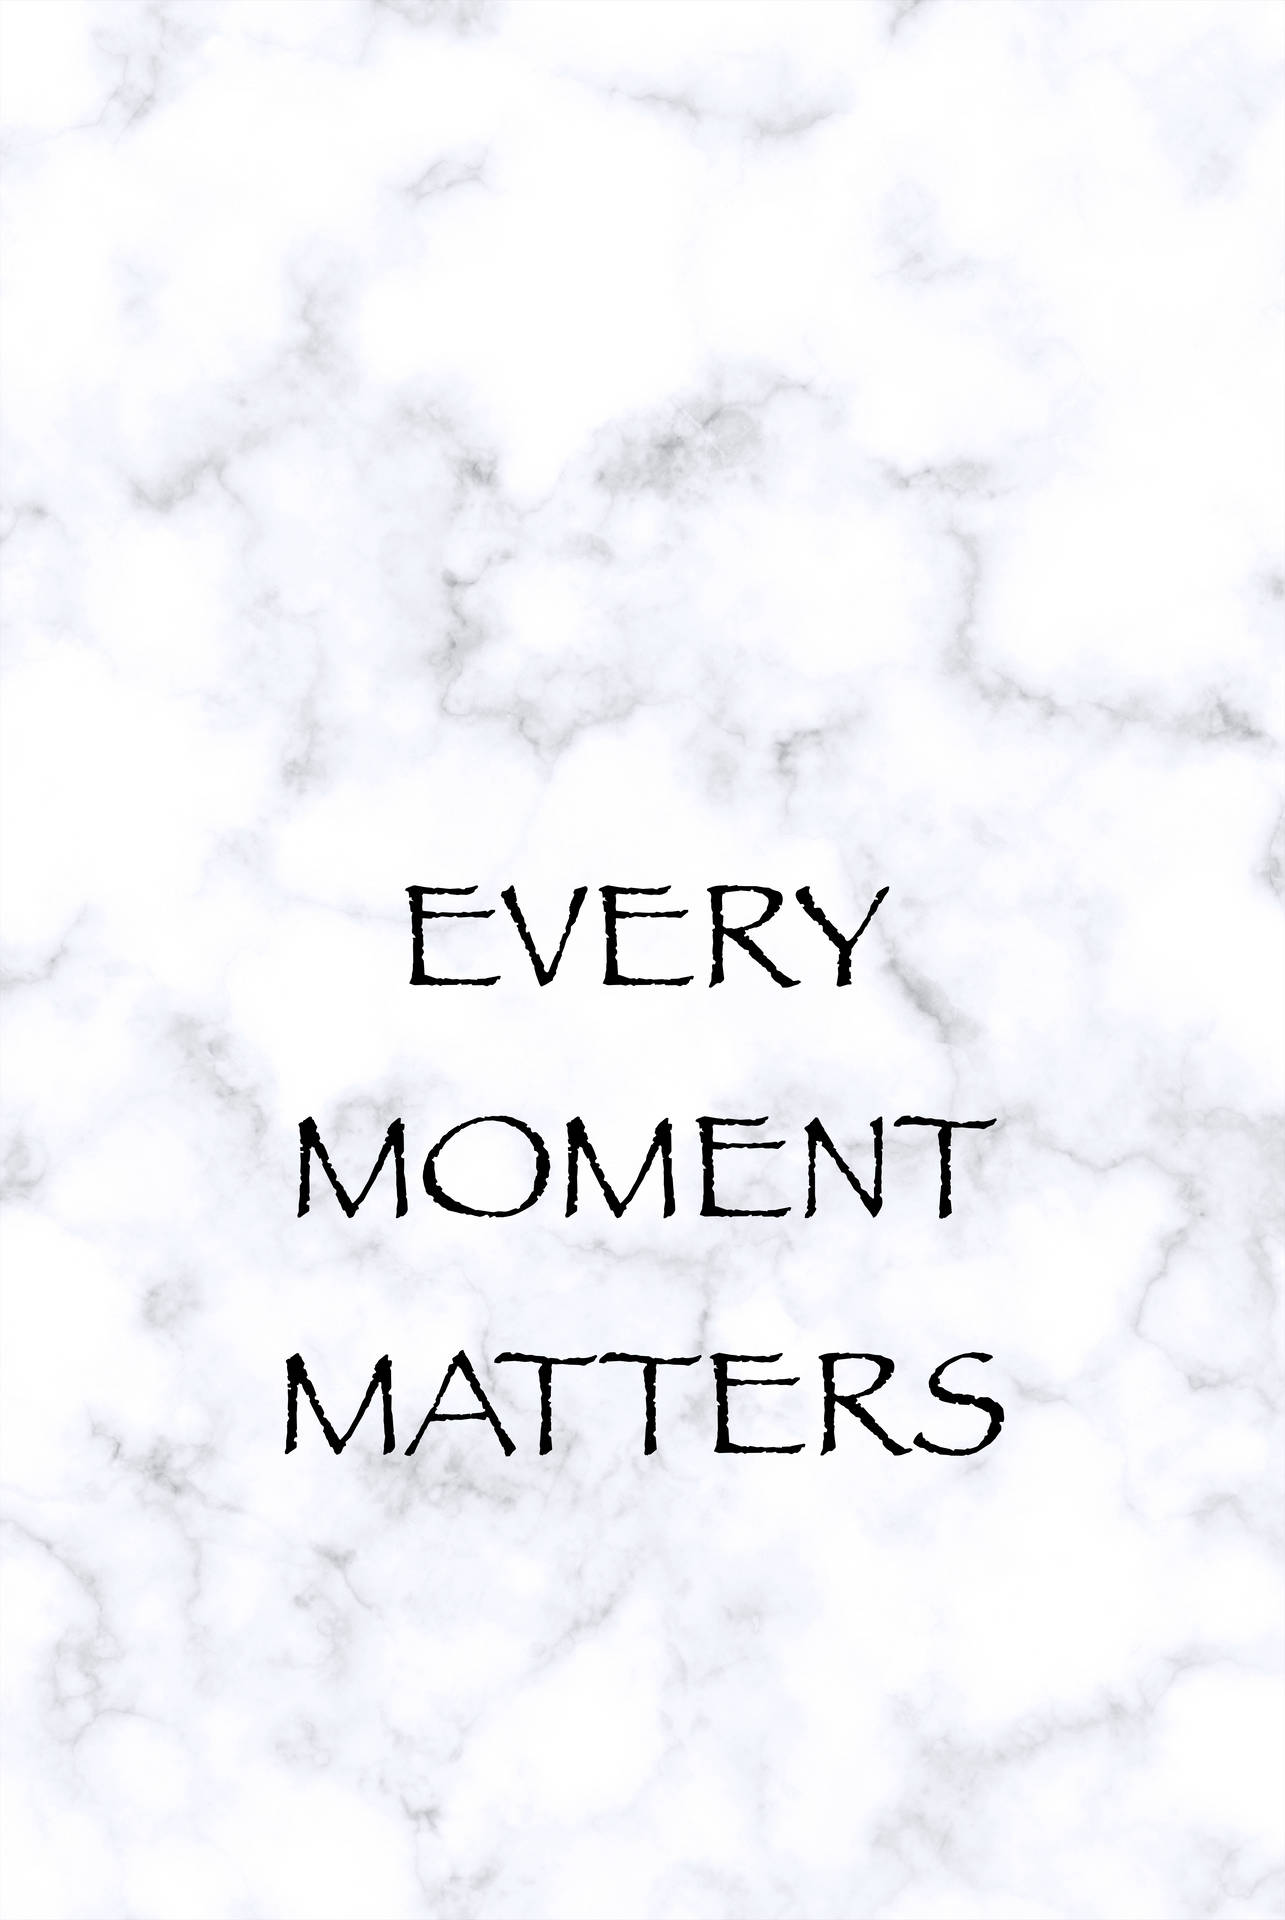 Every Moment Matters Wallpaper